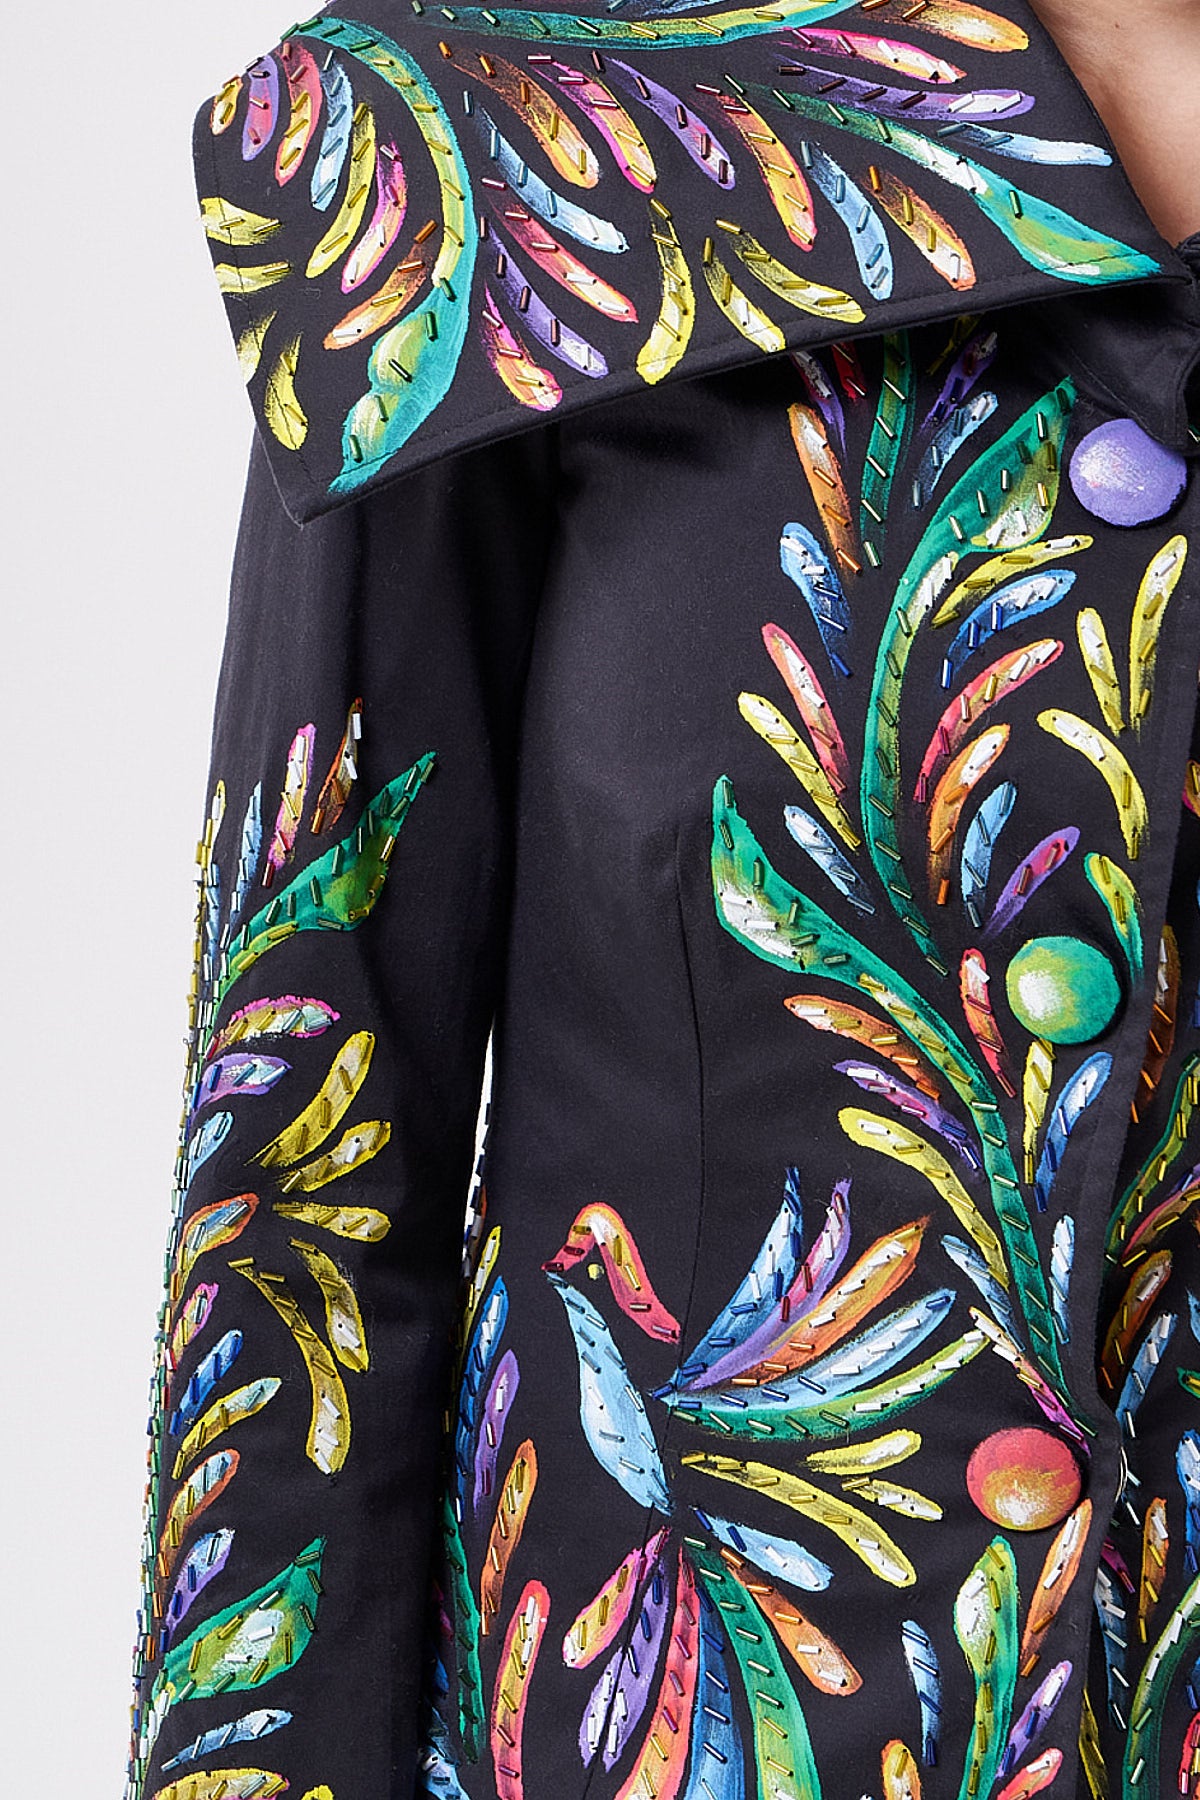 HAND-PAINTED AND HAND-EMBROIDERED JACKET - OTOMI